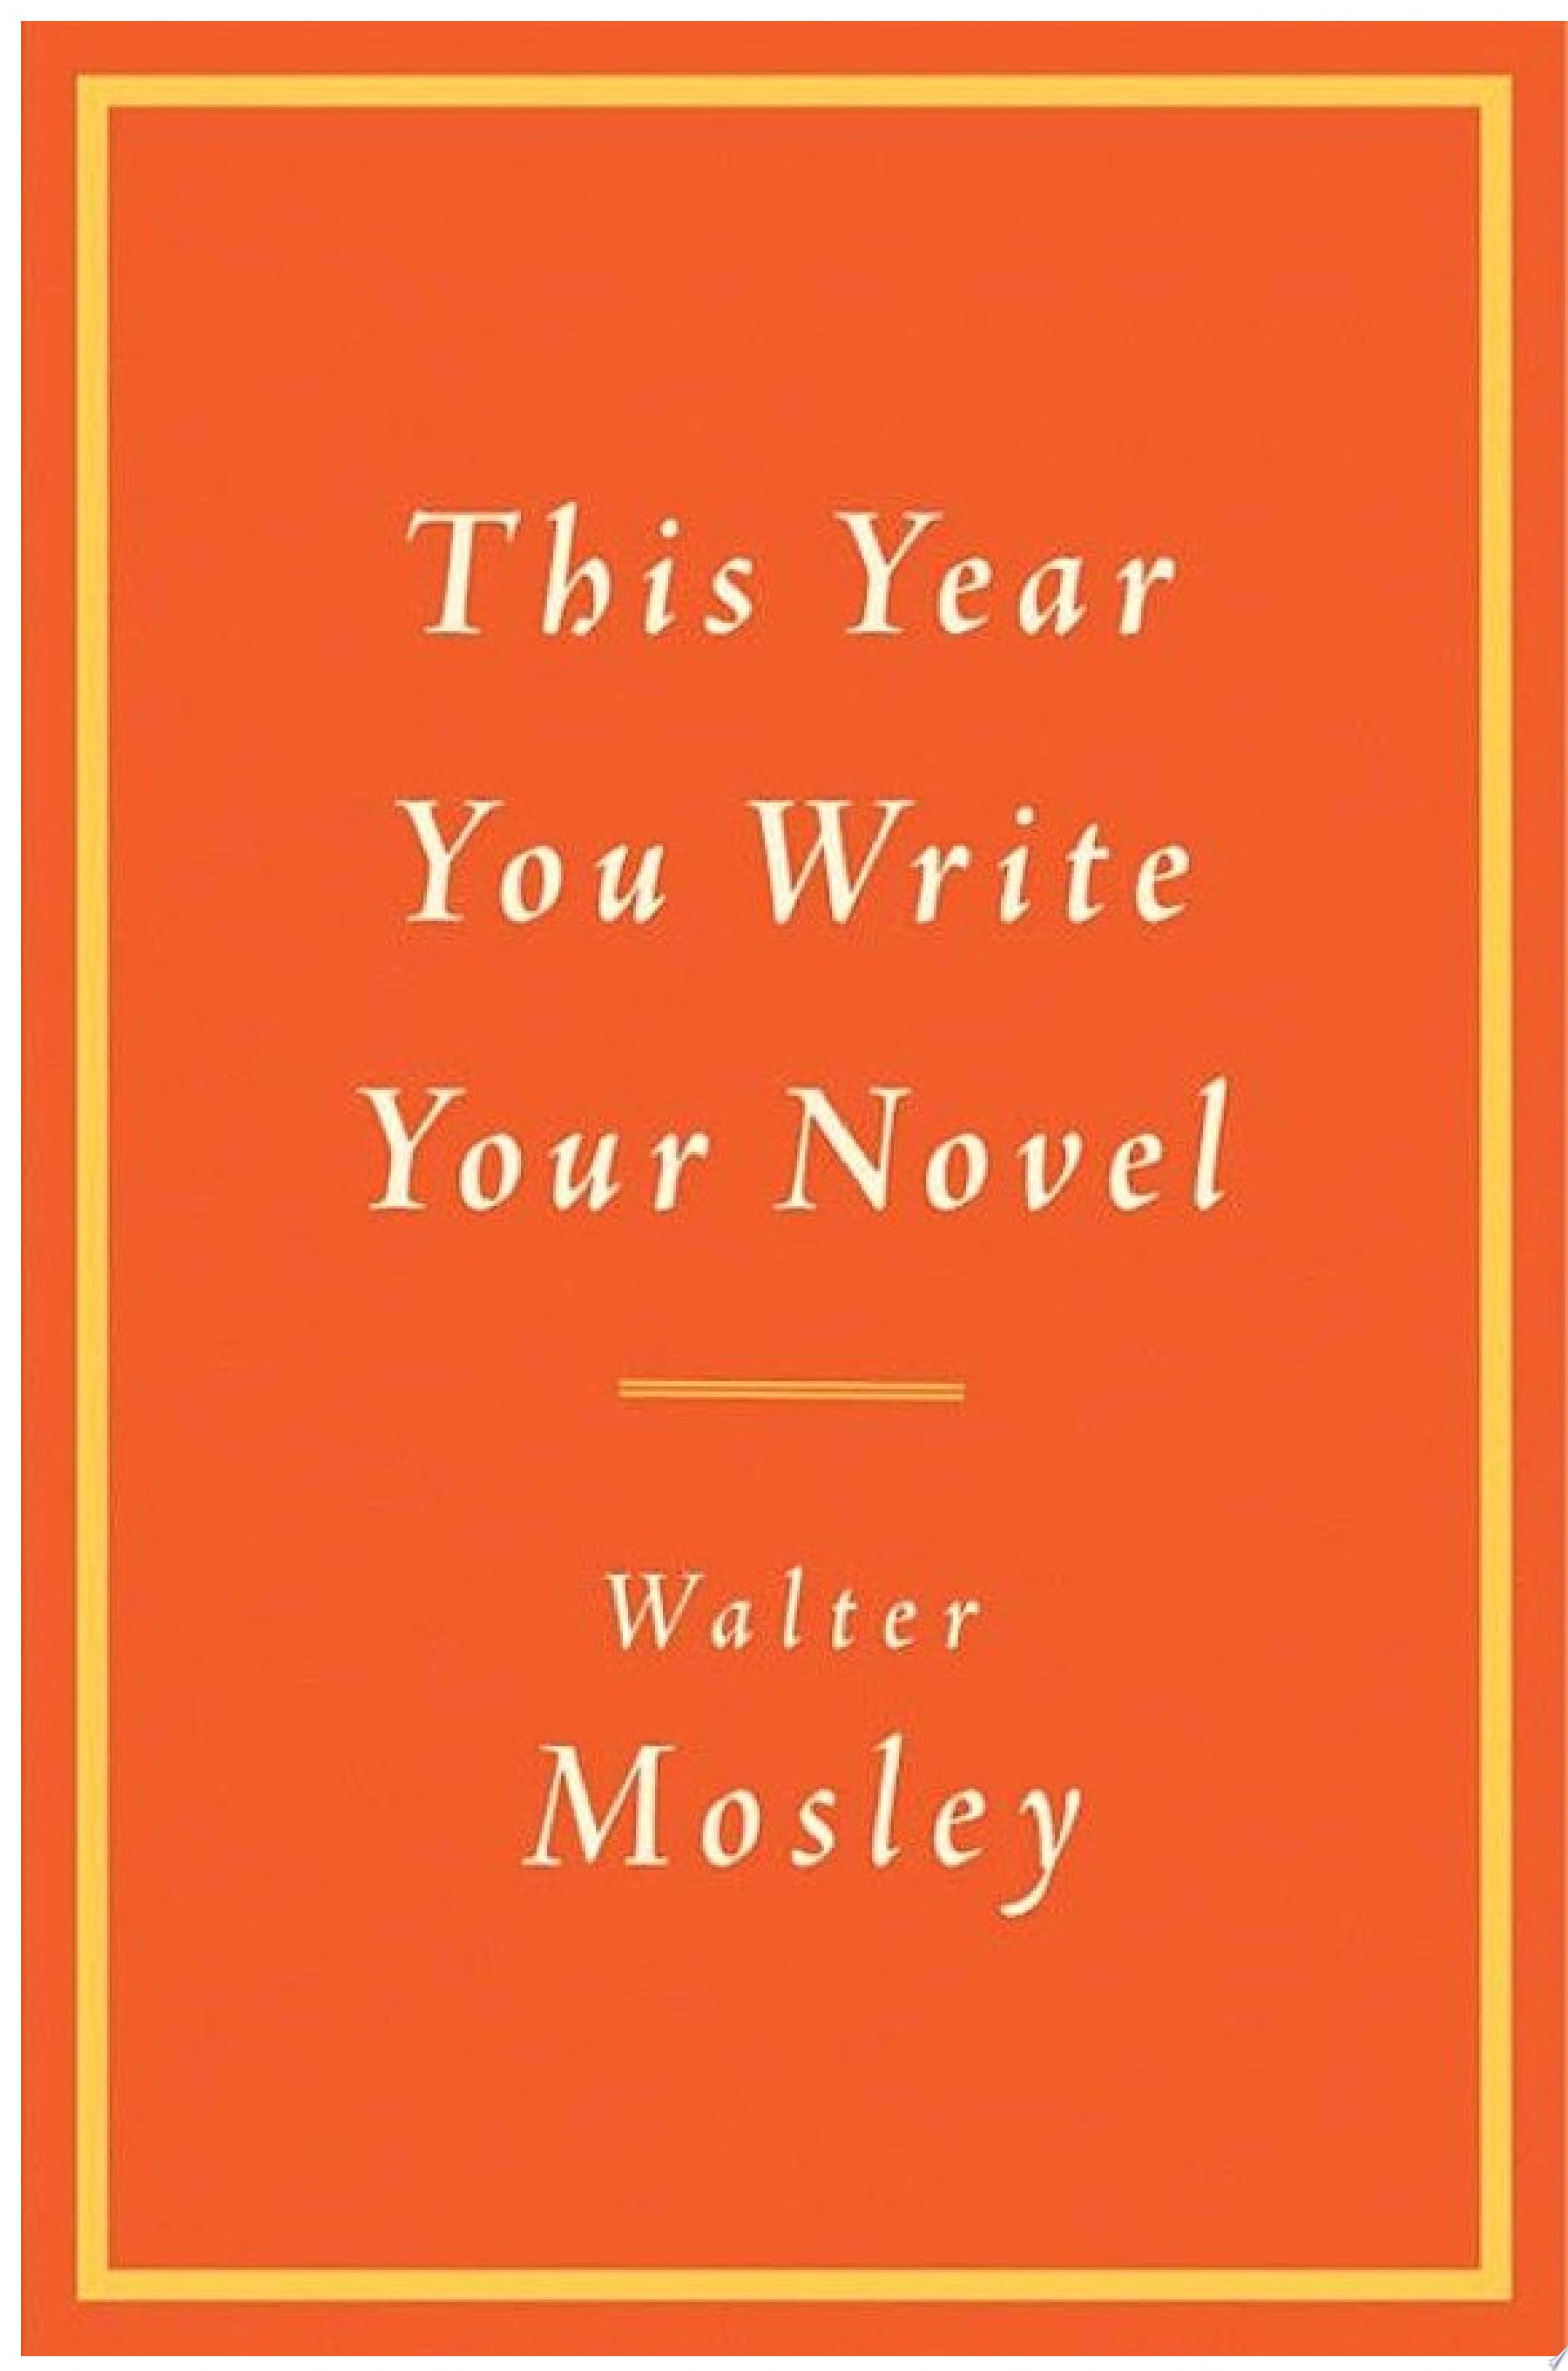 Image for "This Year You Write Your Novel"